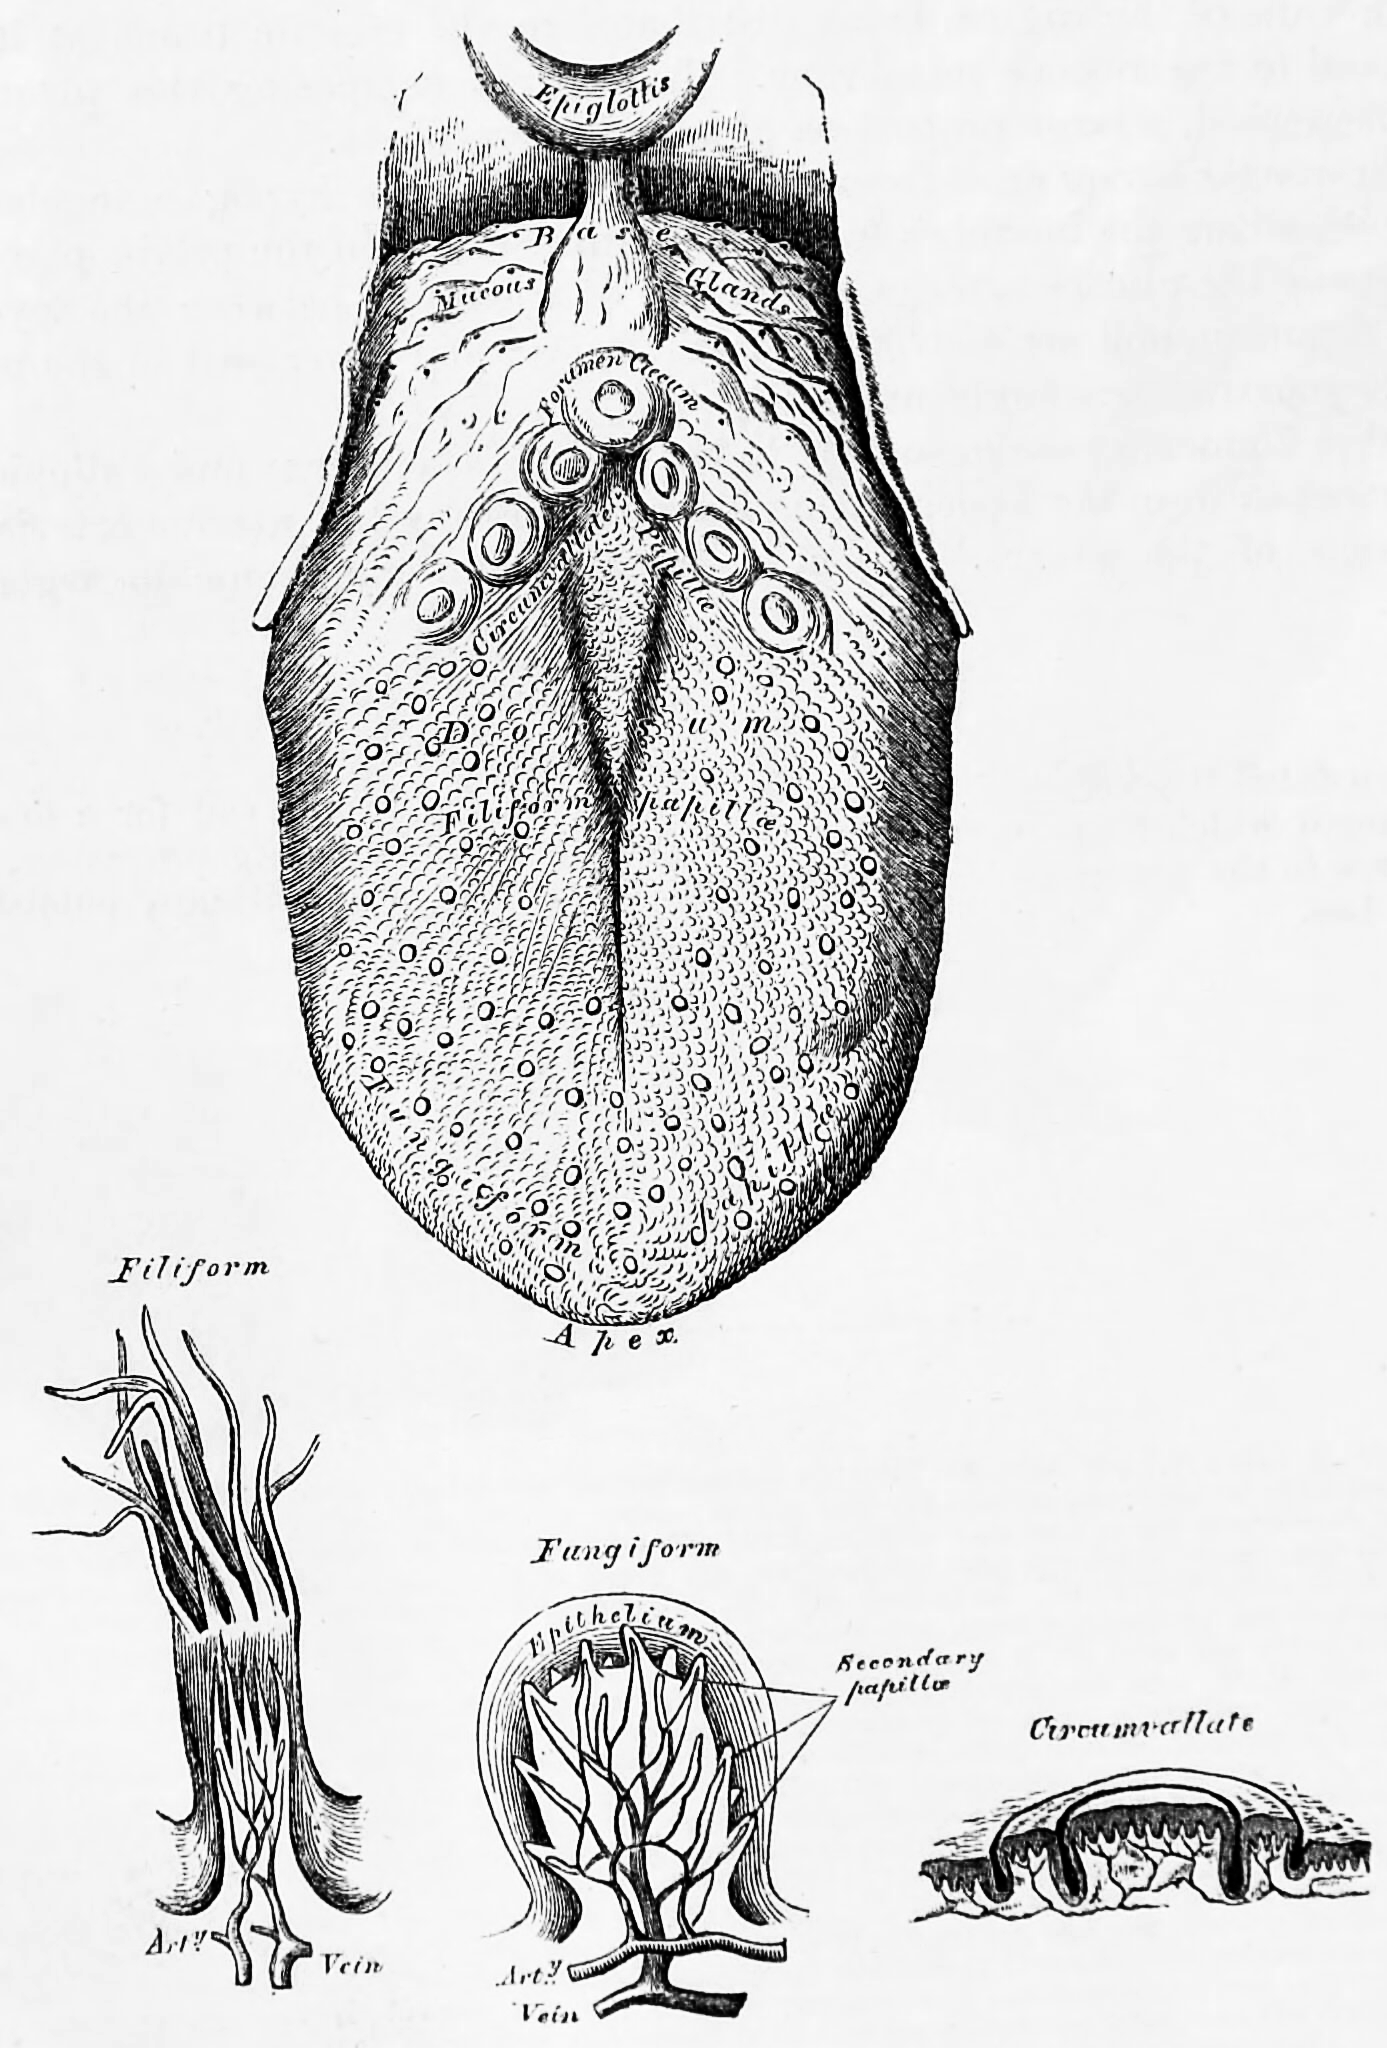 The tongue and three kinds of papillae magnified. Bottom left to right: filiform, fungiform and circumvallate papillae. From Gray, Henry: Anatomy Descriptive And Surgical. 7th Edition, Longmans, Green, And Co., London, 1875